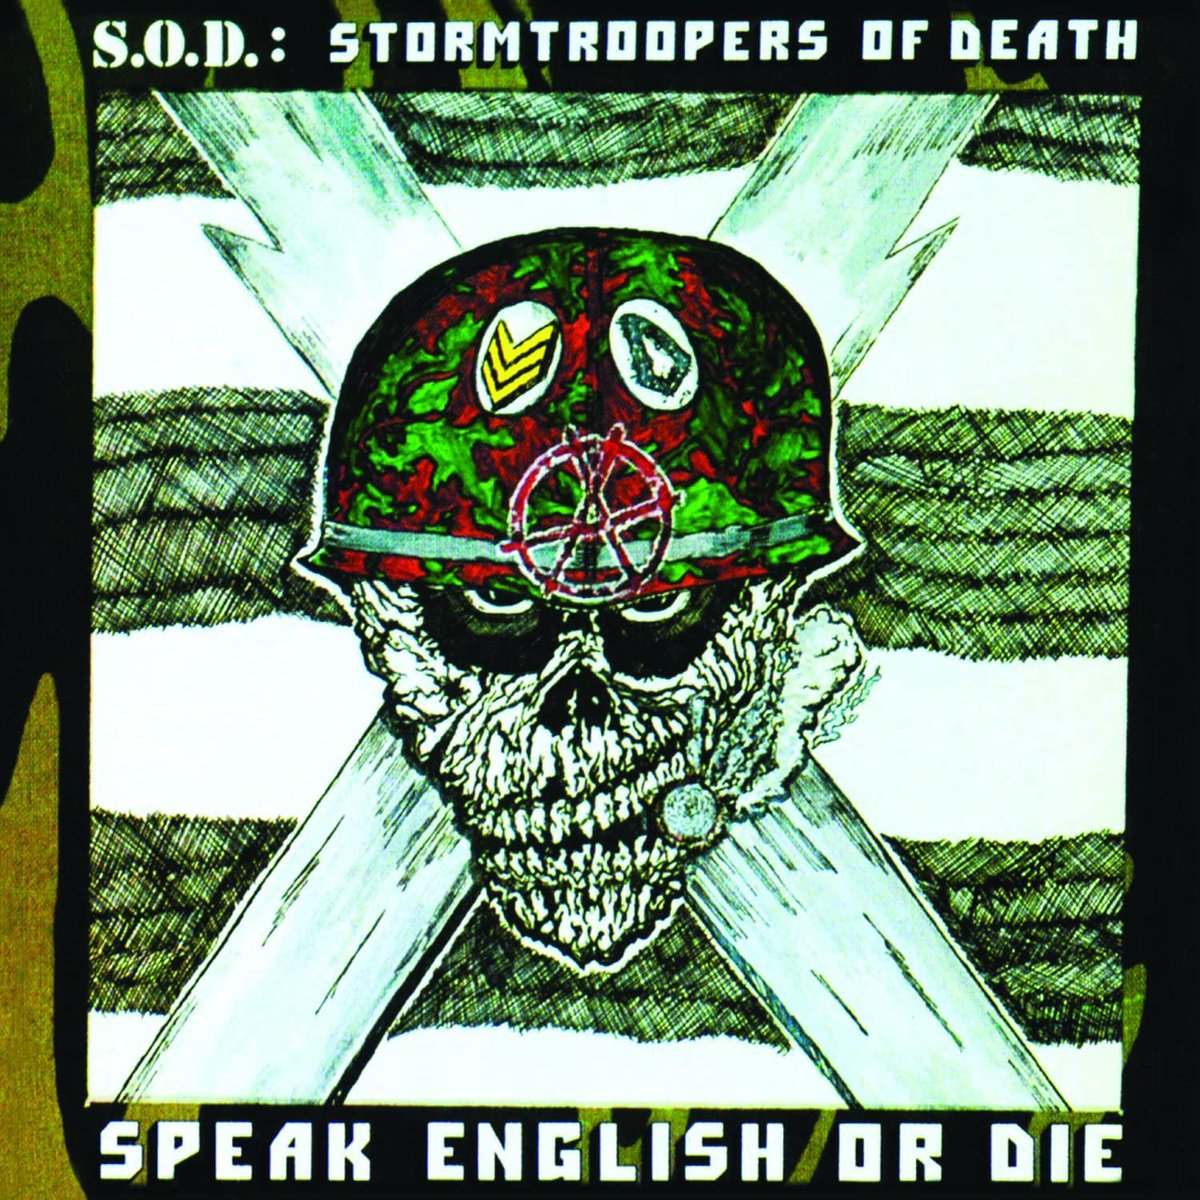 Aug 30th 1985 #StormtroopersOfDeath released their debut album “Speak English Or Die” #FreddyKrueger #DoucheCrew #UnitedForces #KillYourself #ThrashMetal 

Did you know..
The album is considered one of the greatest and most influential crossover thrash albums of all time.